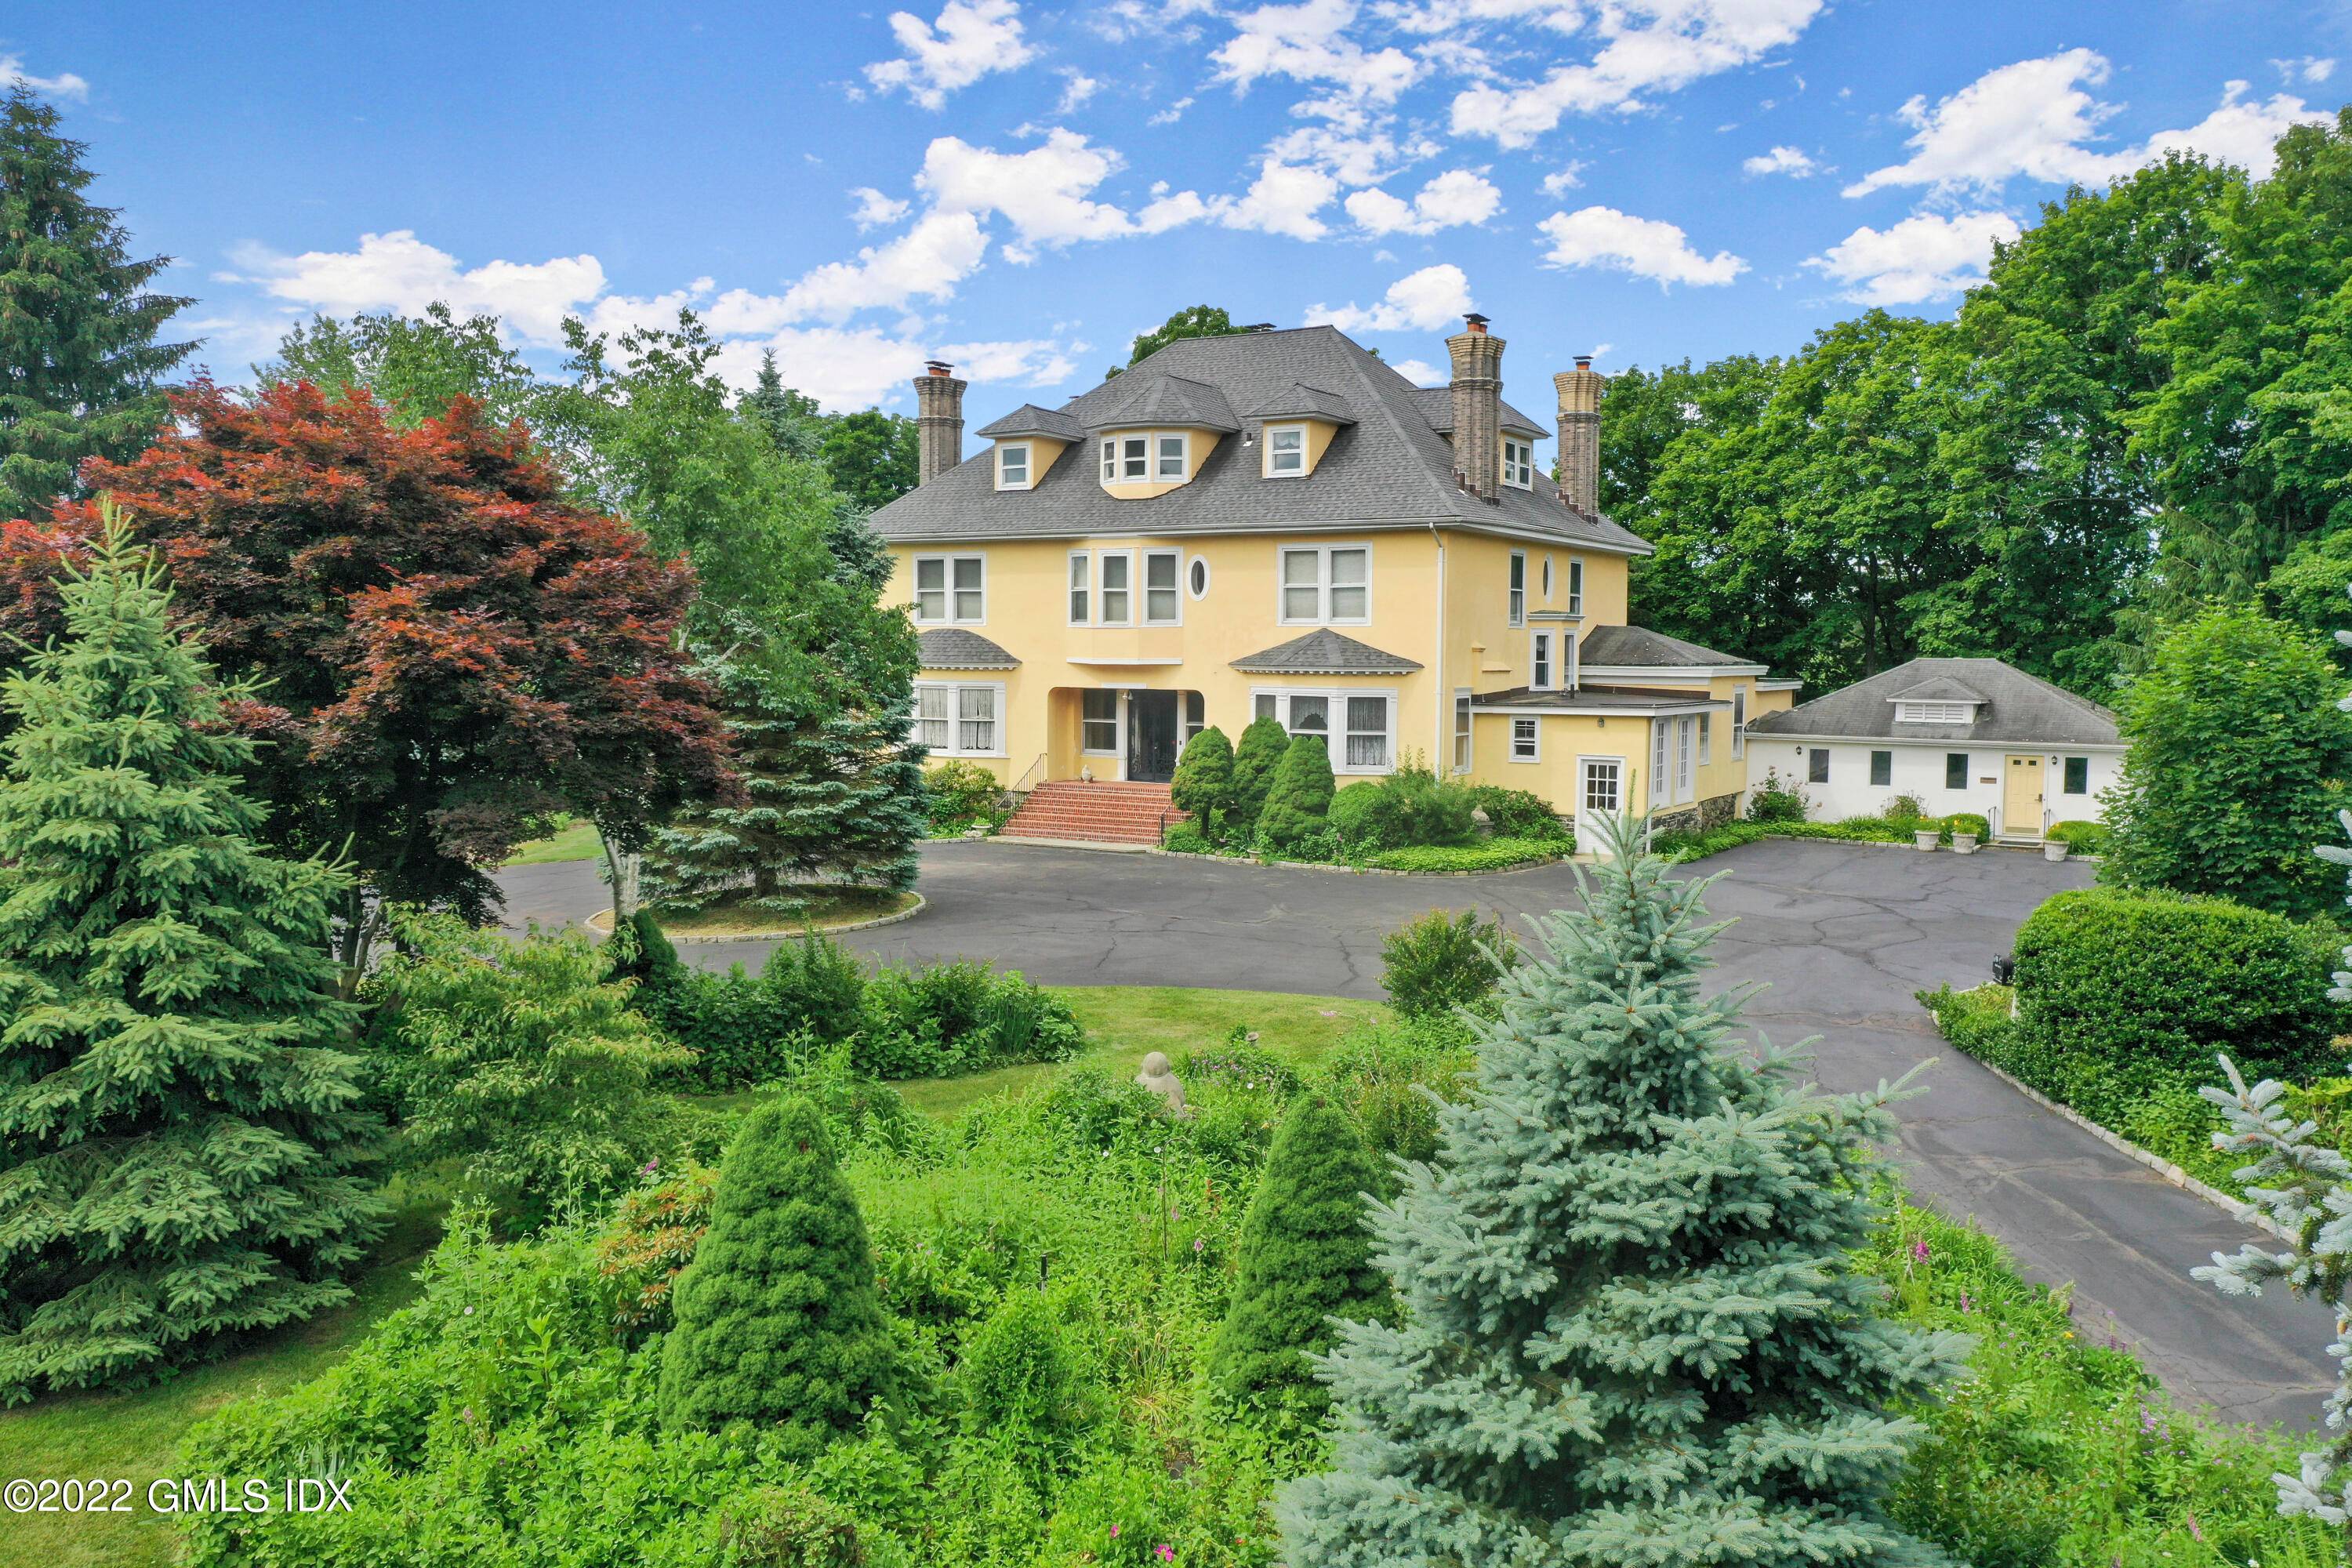 This beautiful nine bedroom, eight bath home is located just minutes from Greenwich's most desired spots.